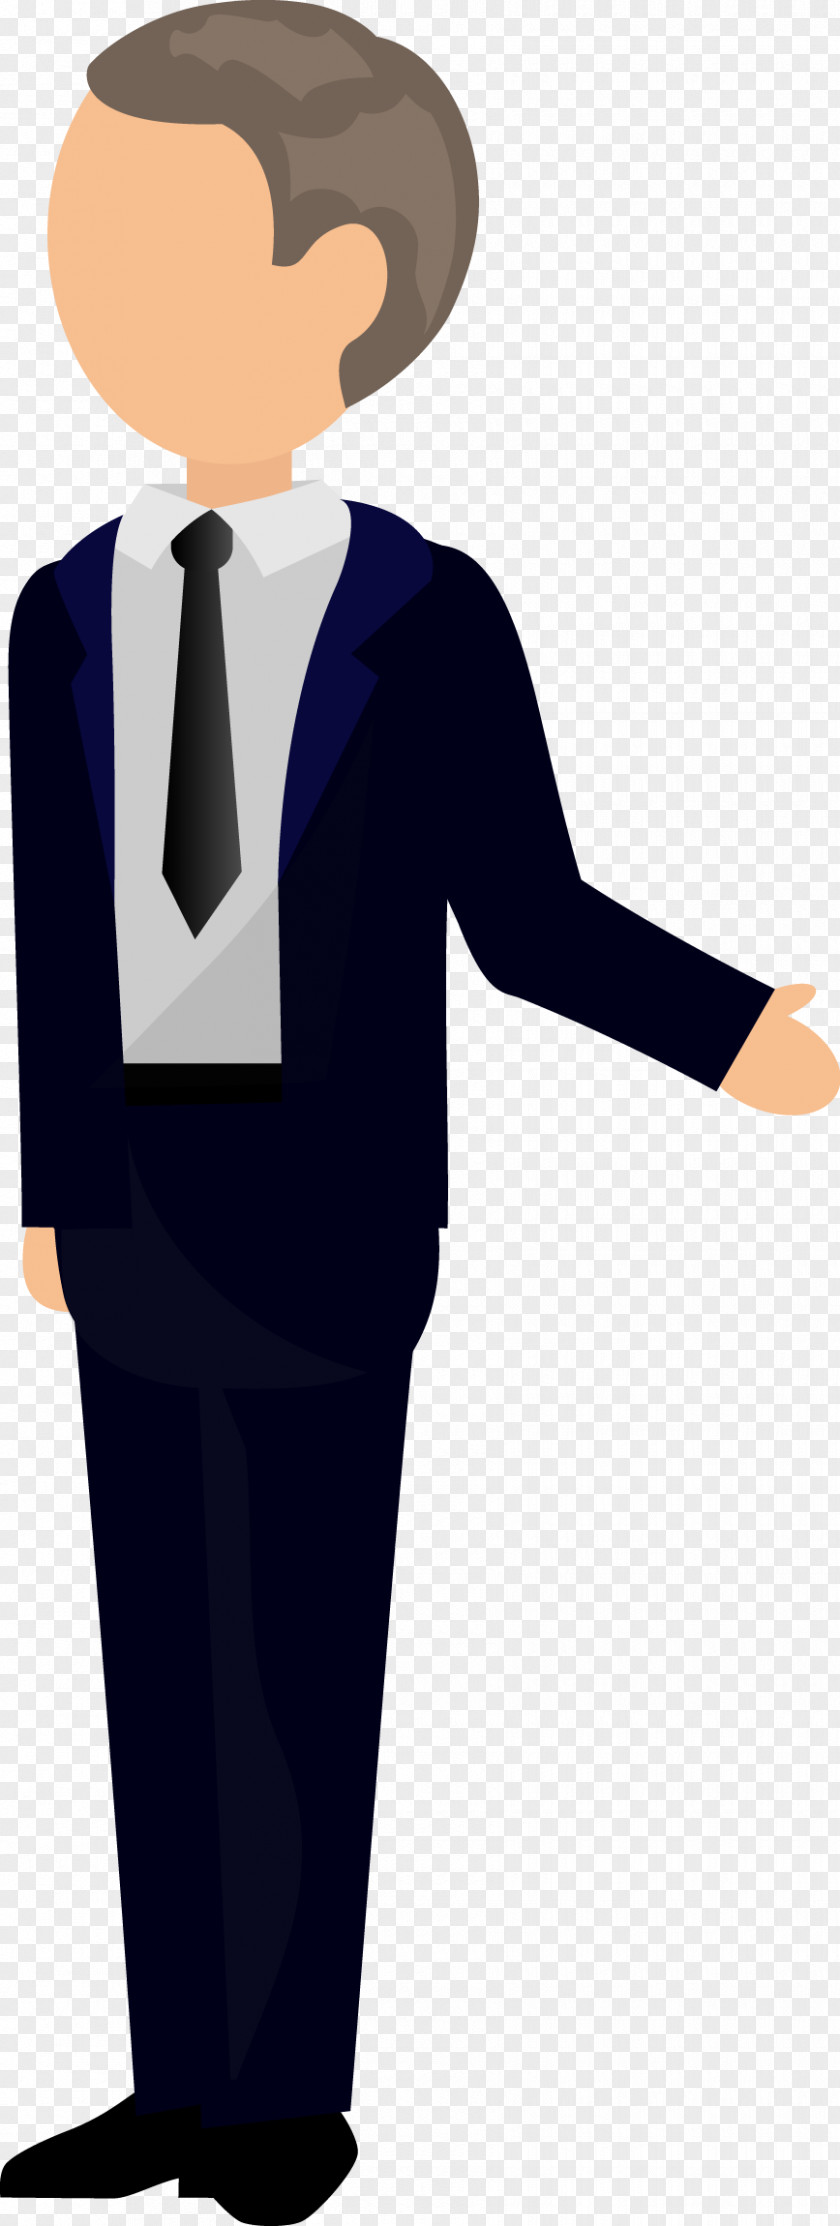 Workplace New Employee Work Vector Cartoon Download Illustration PNG